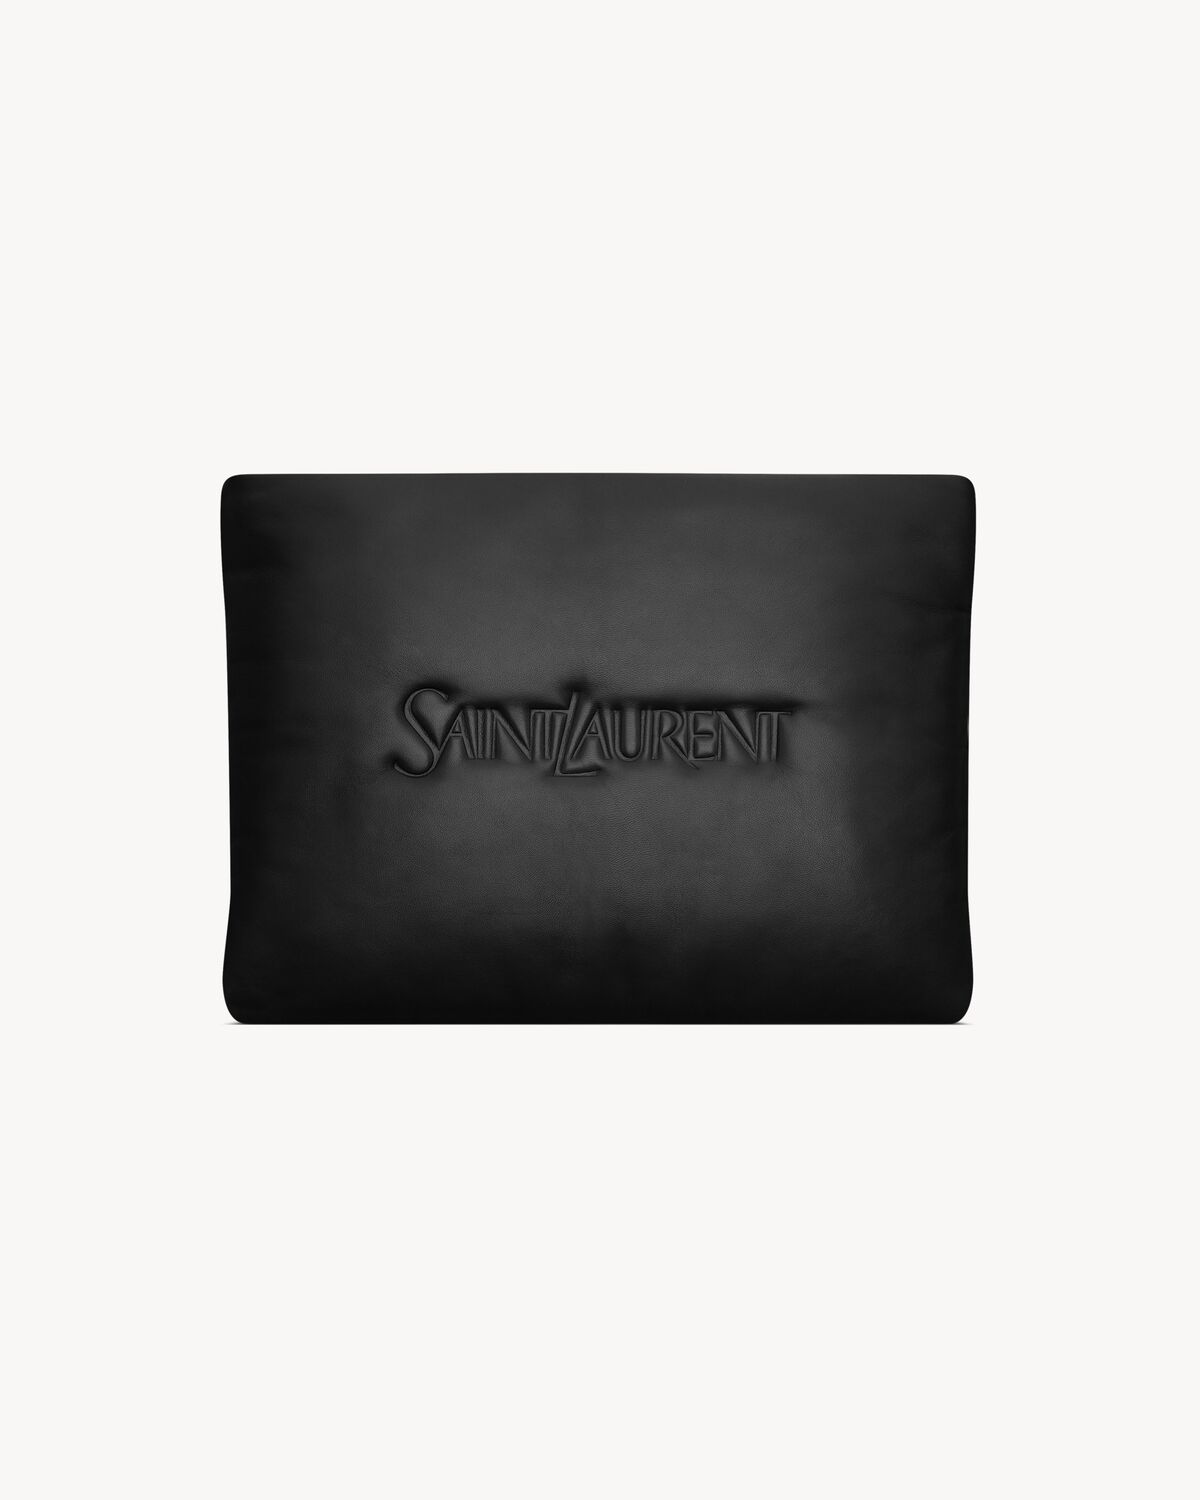 SAINT LAURENT large puffy pouch in lambskin